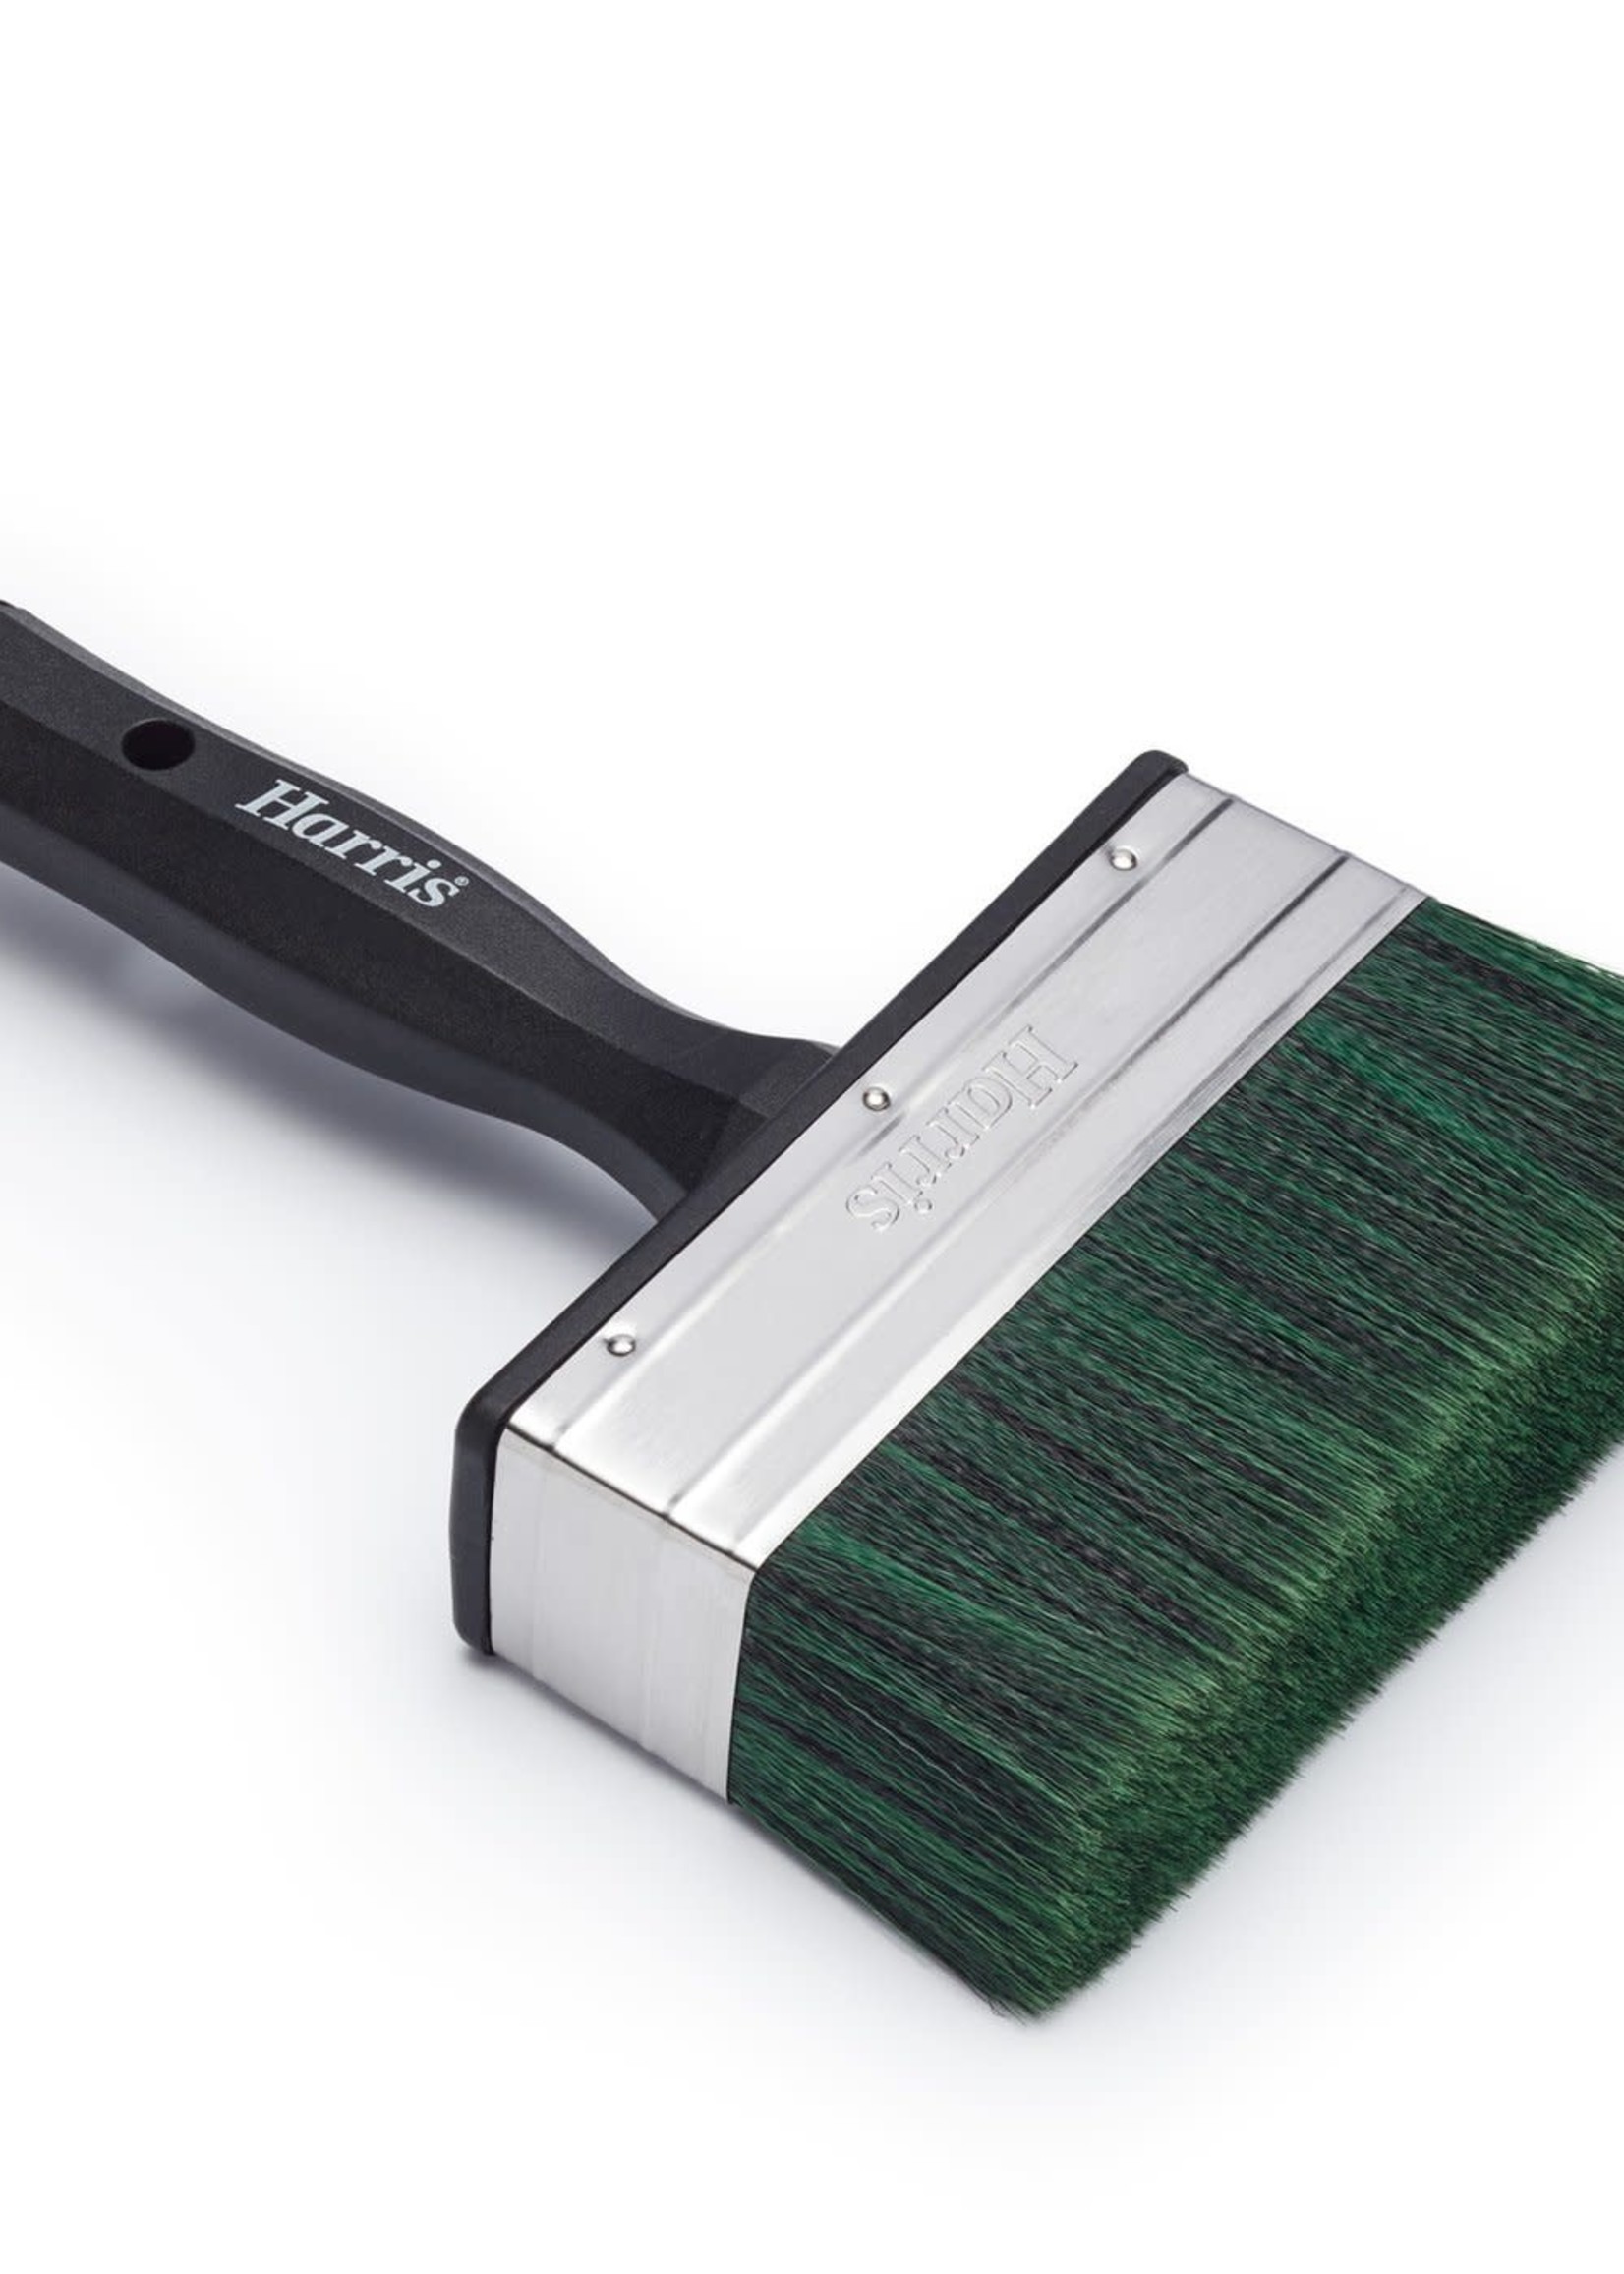 Harris Harris Seriously good shed and fence brush